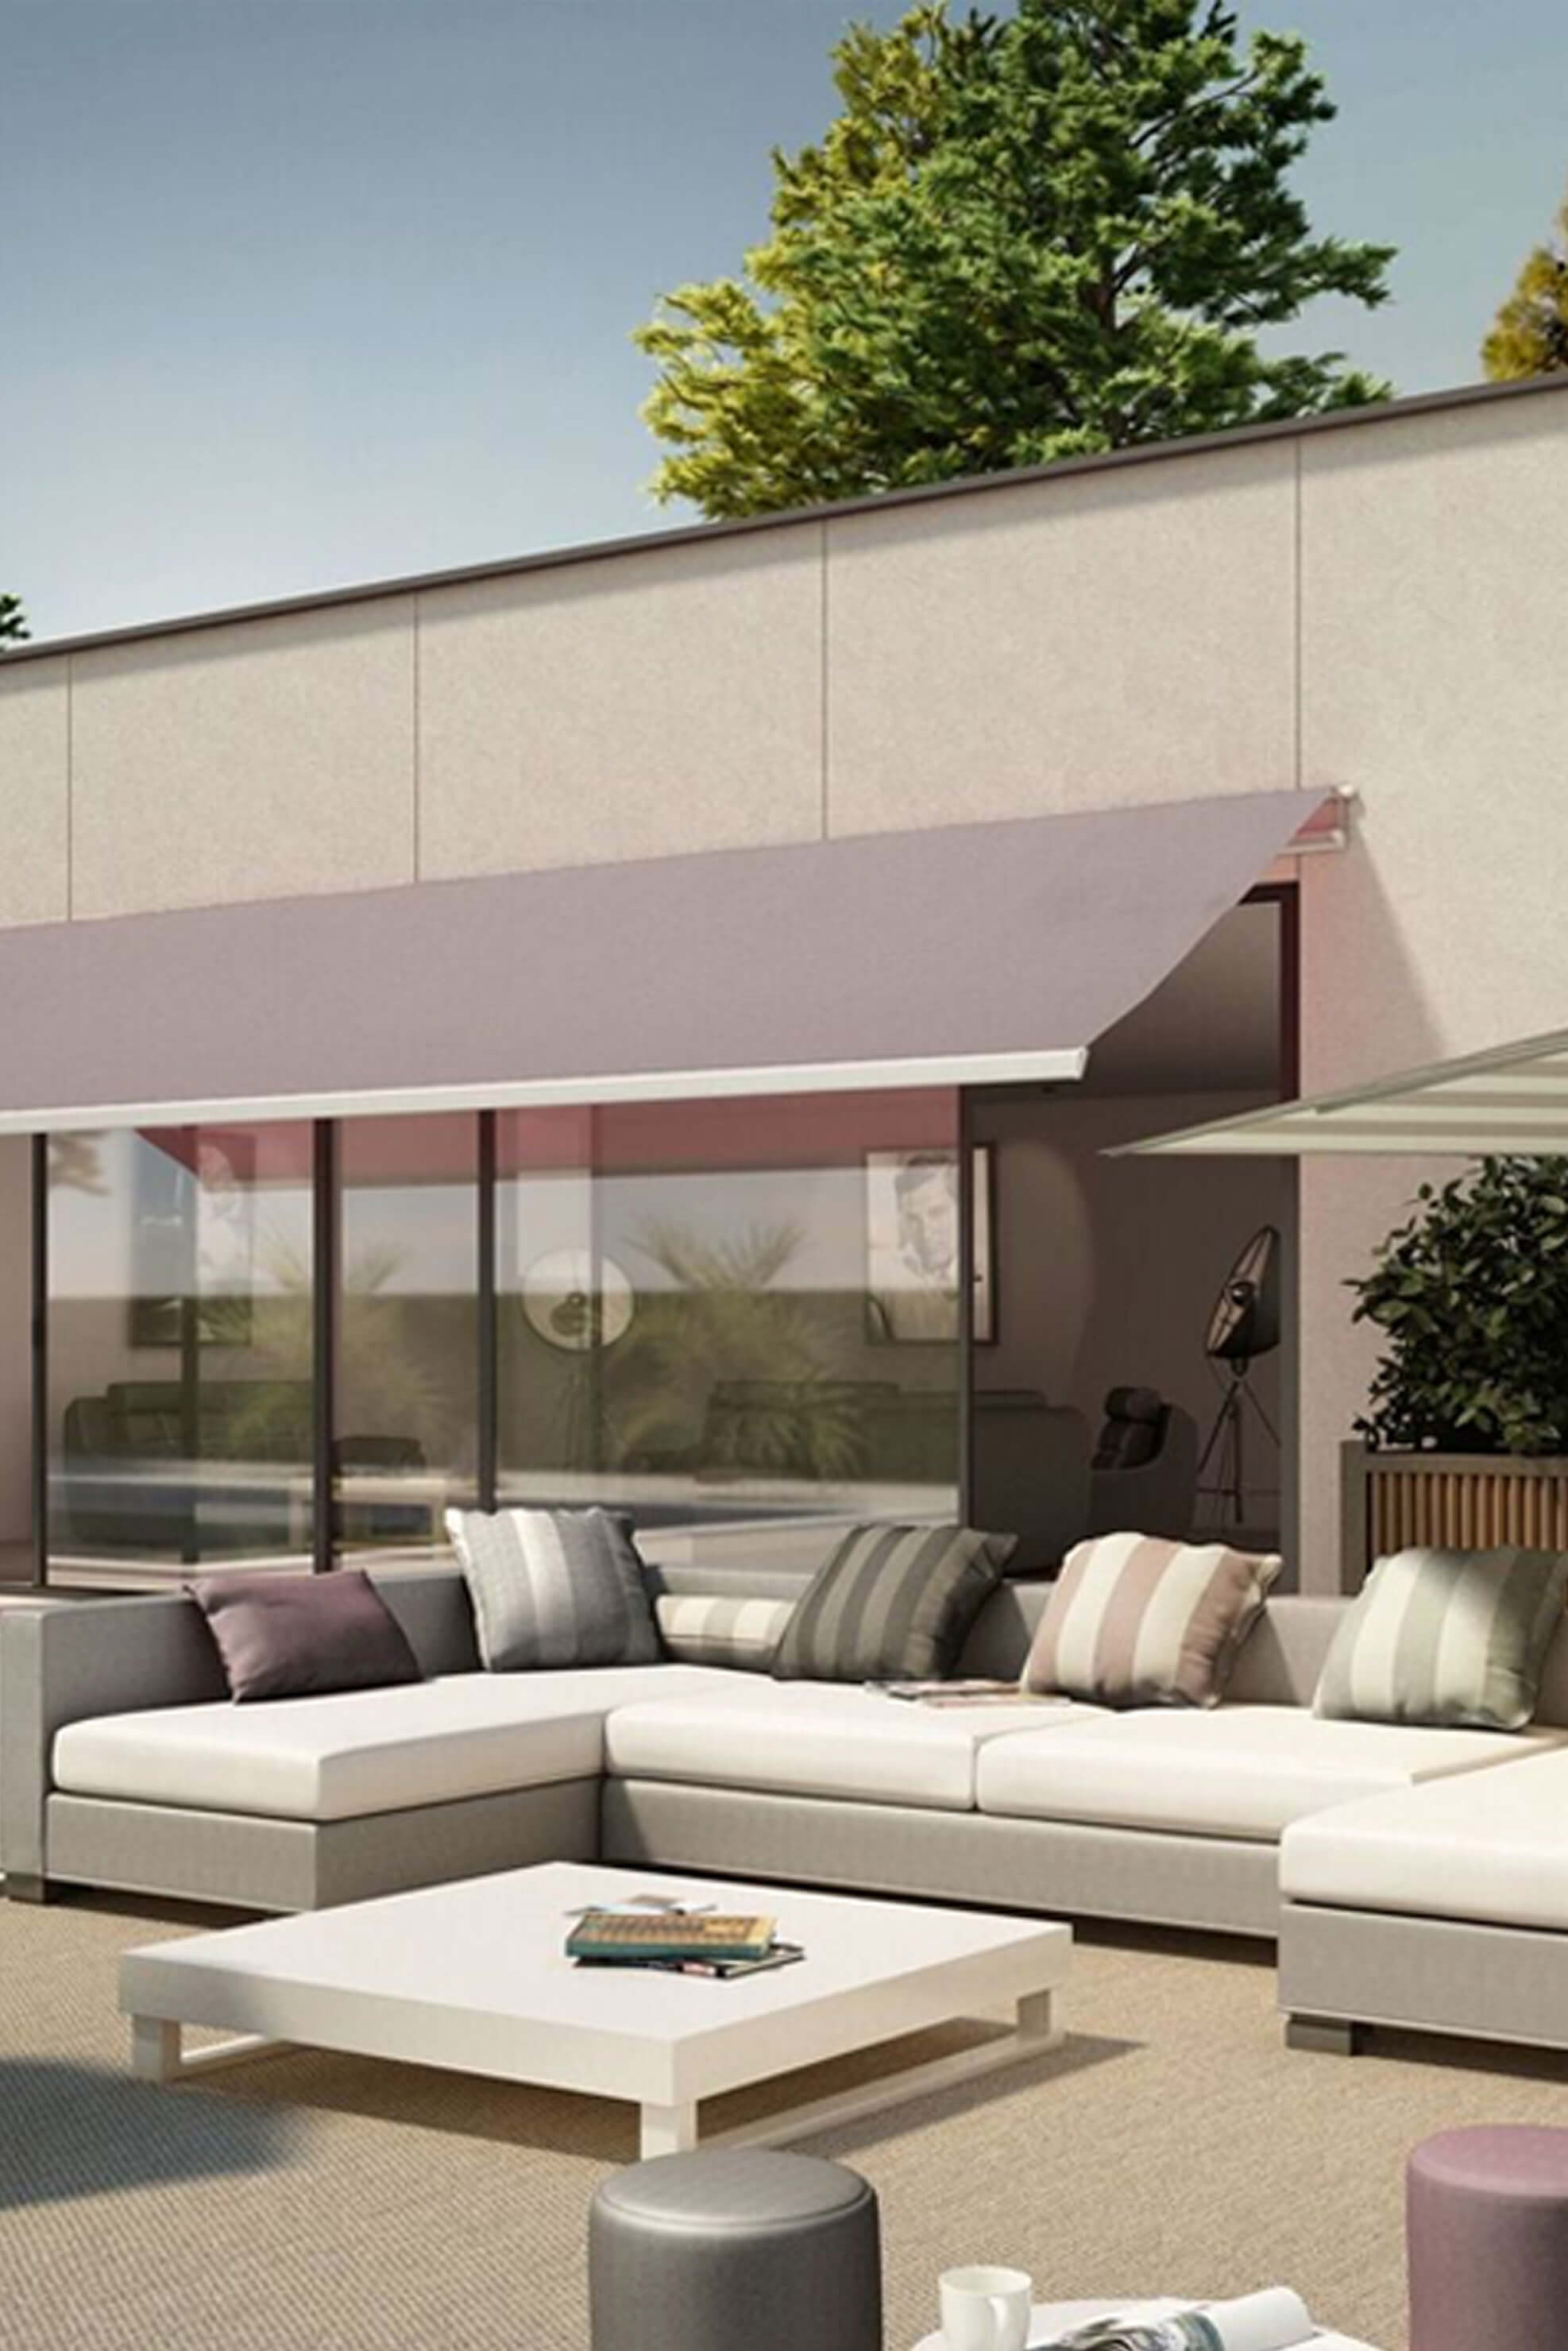 Patio furniture shaded by retractable awning made using Sunbrella fabrics